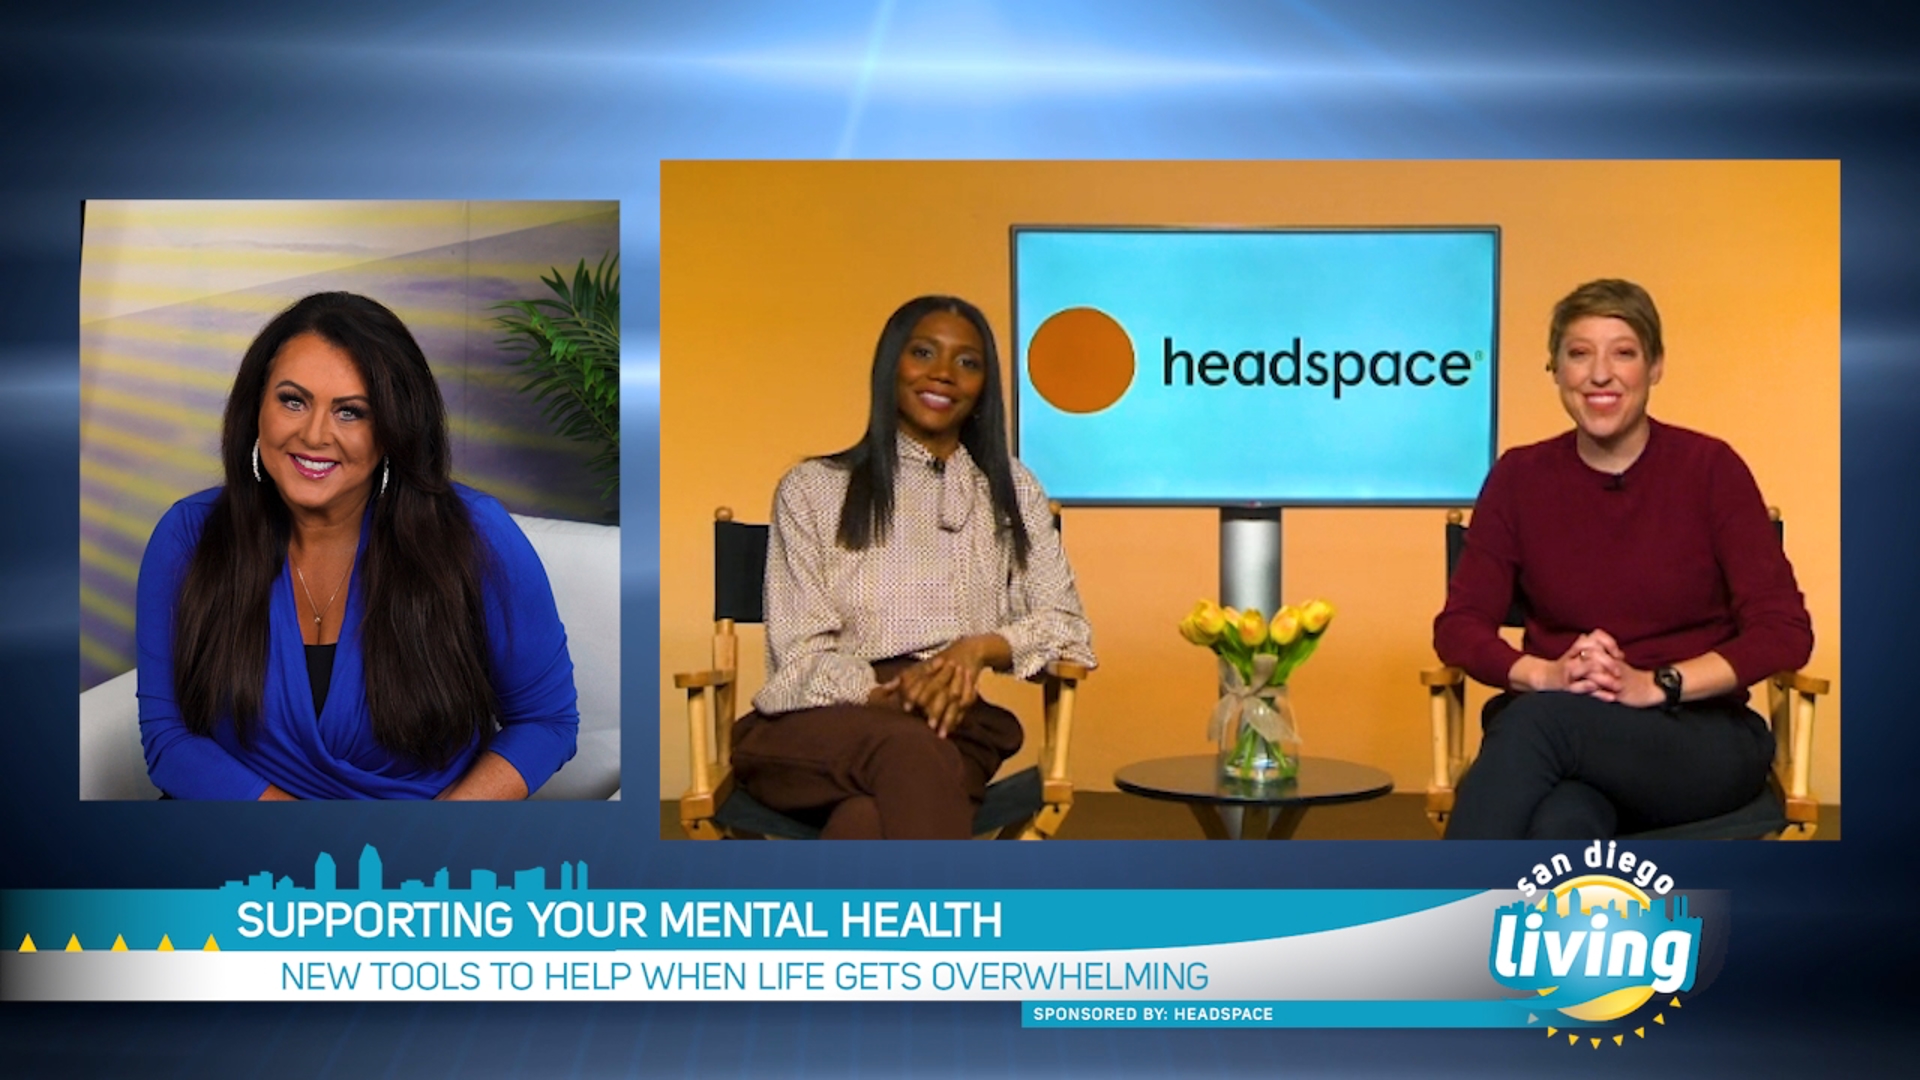 New Tools to Help When Life Gets Overwhelming. Sponsored by Headspace